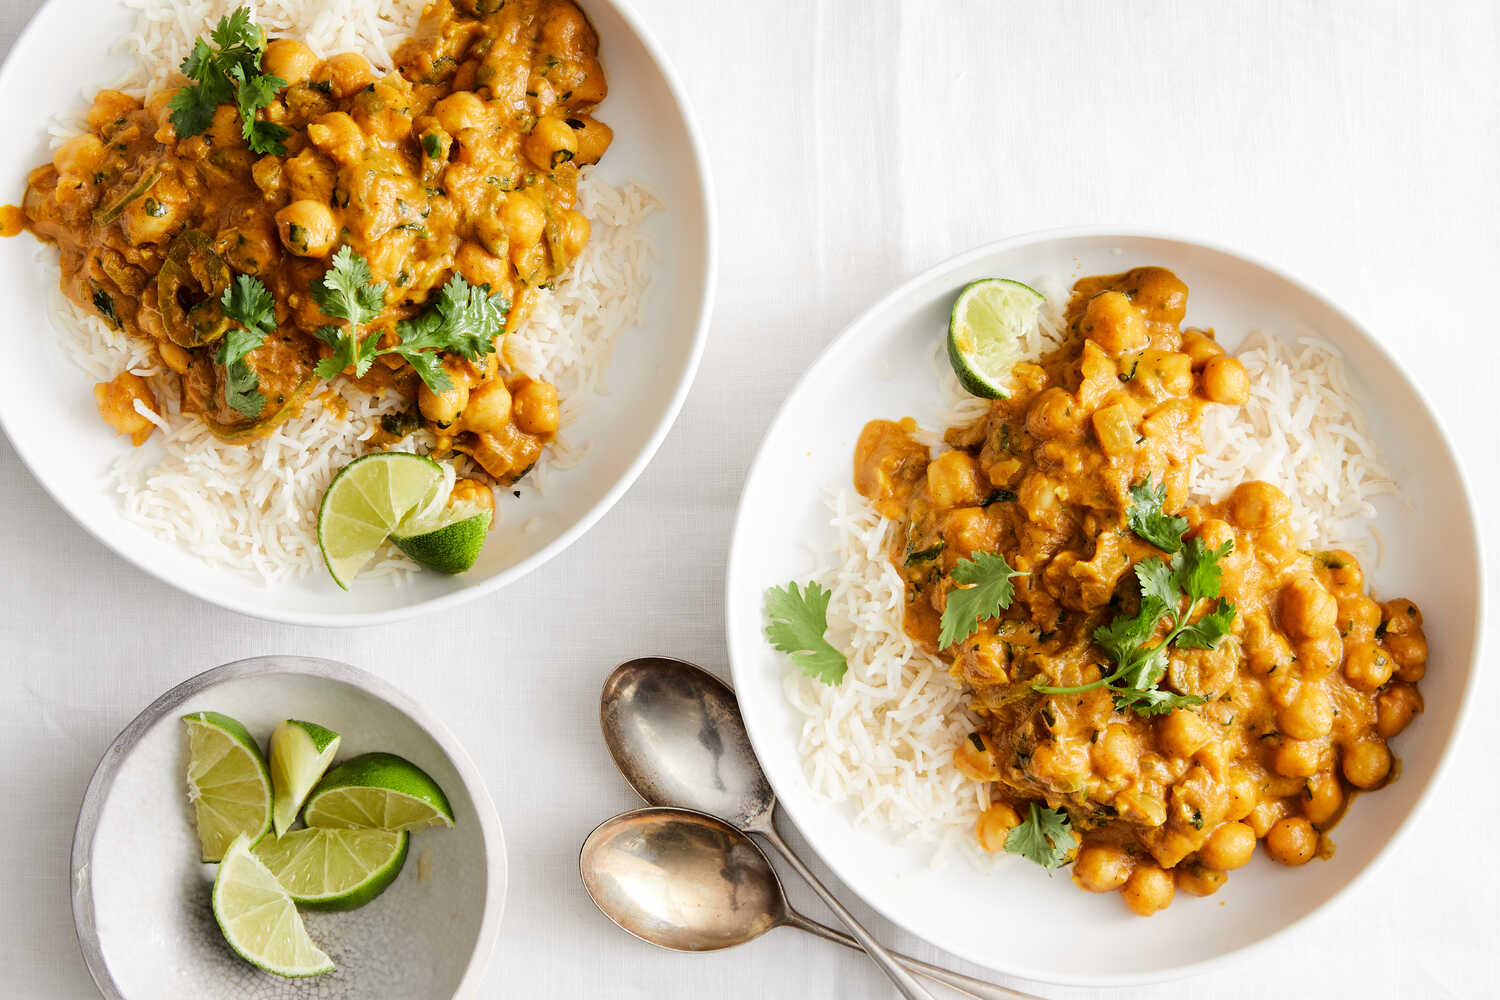 This lush coconut curry chickpea dish skips meat and dairy but not flavor.